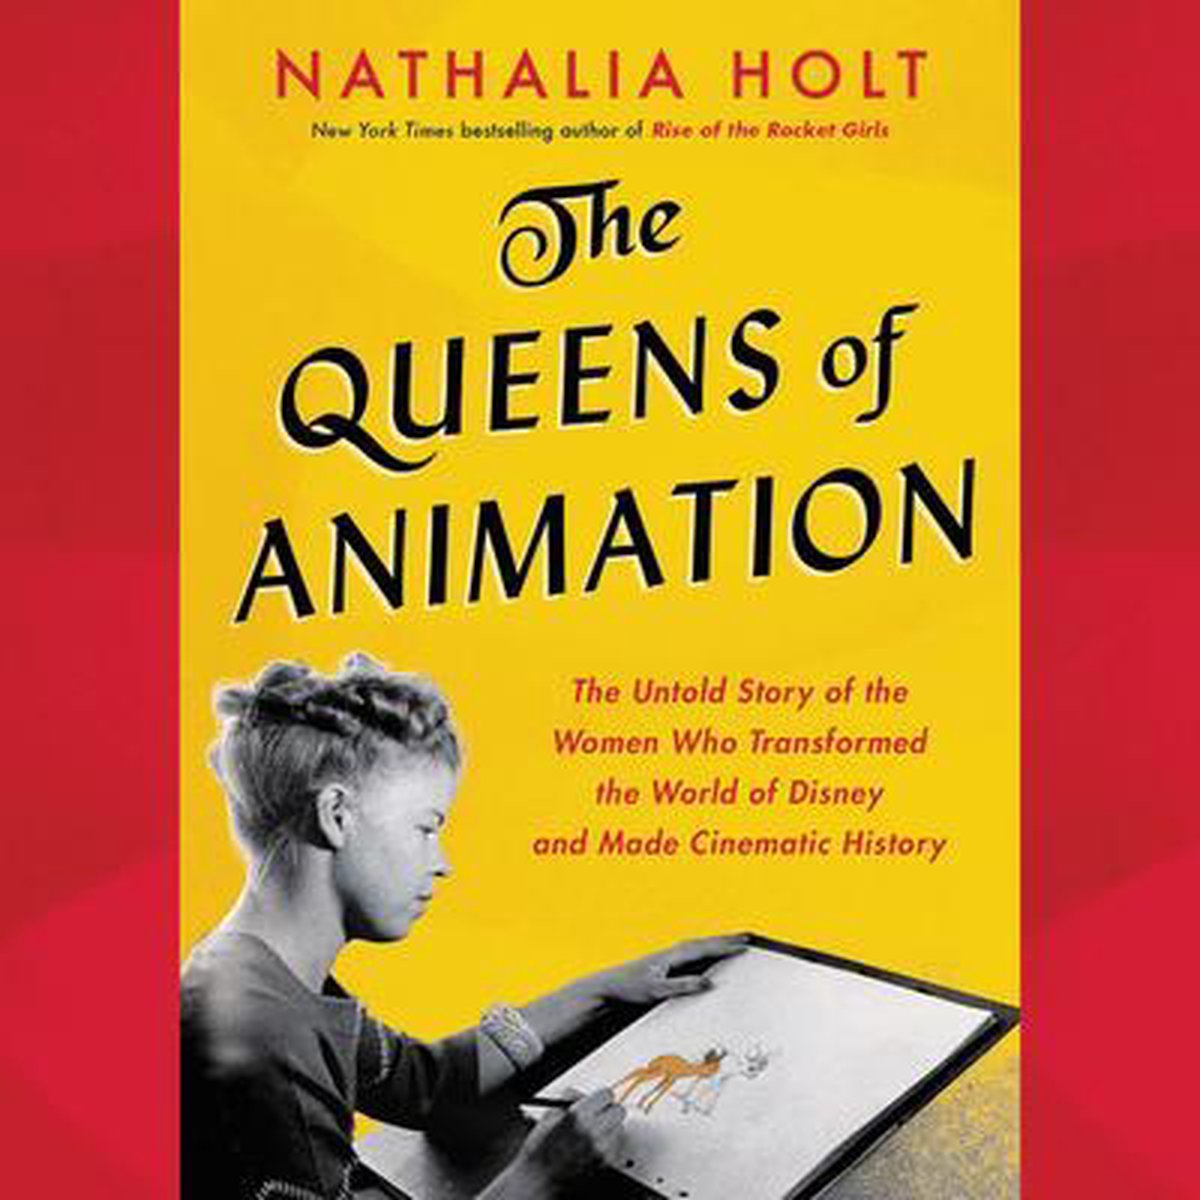 The Queens of Animation: The Untold Story of the Women Who Transformed the World of Disney and Made Cinematic History - Nathalia Holt